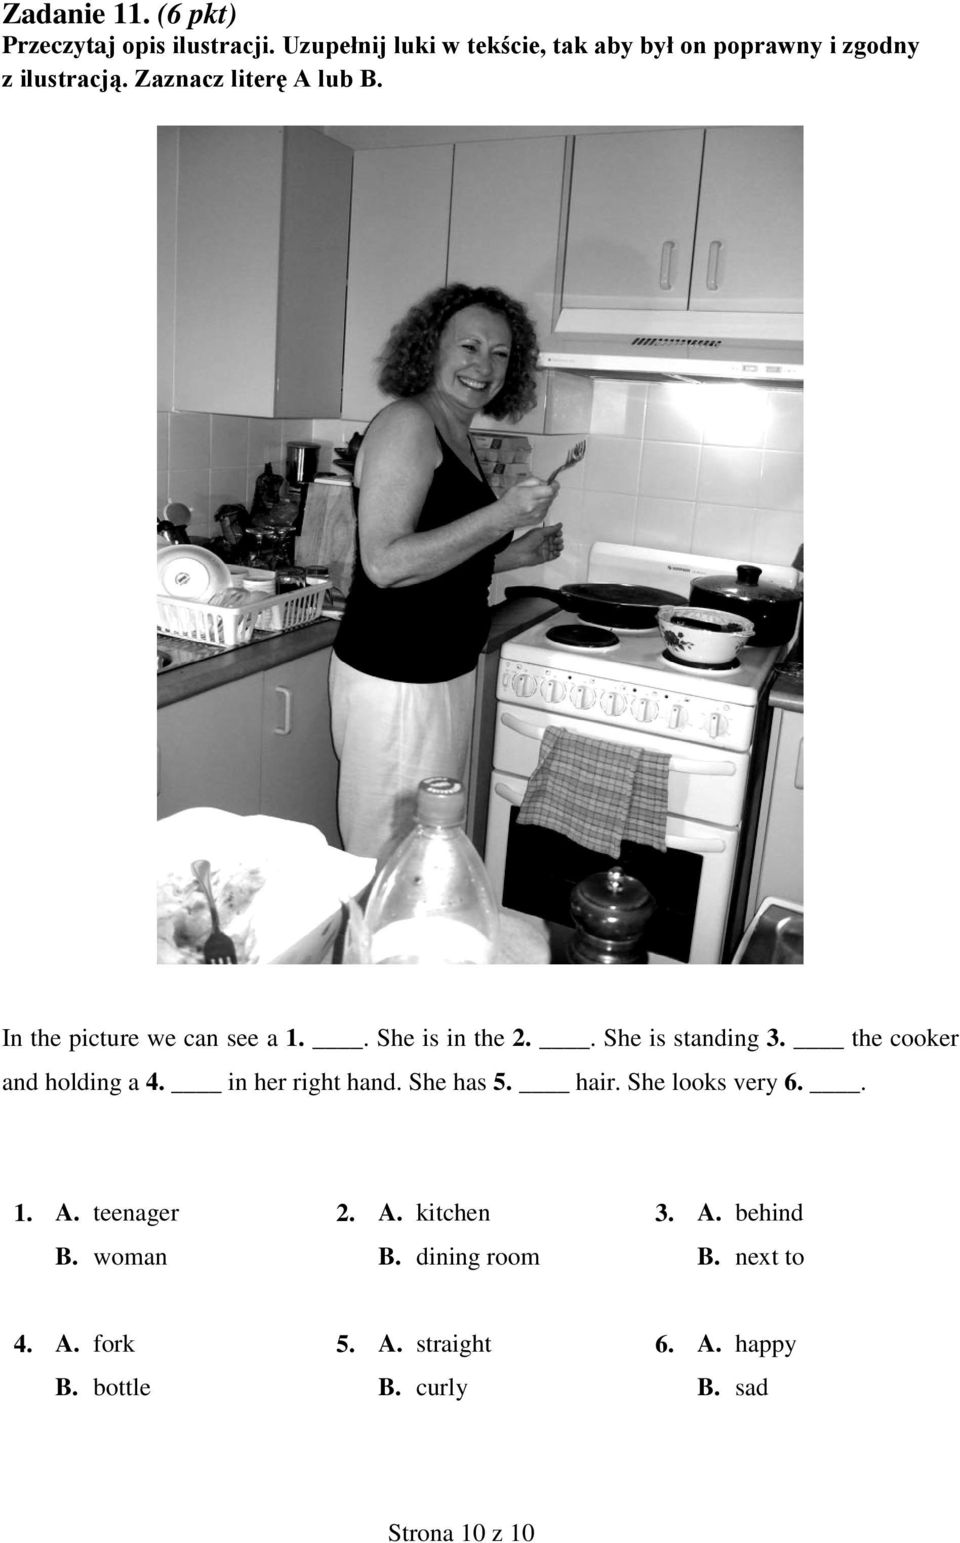 In the picture we can see a 1.. She is in the 2.. She is standing 3. the cooker and holding a 4.